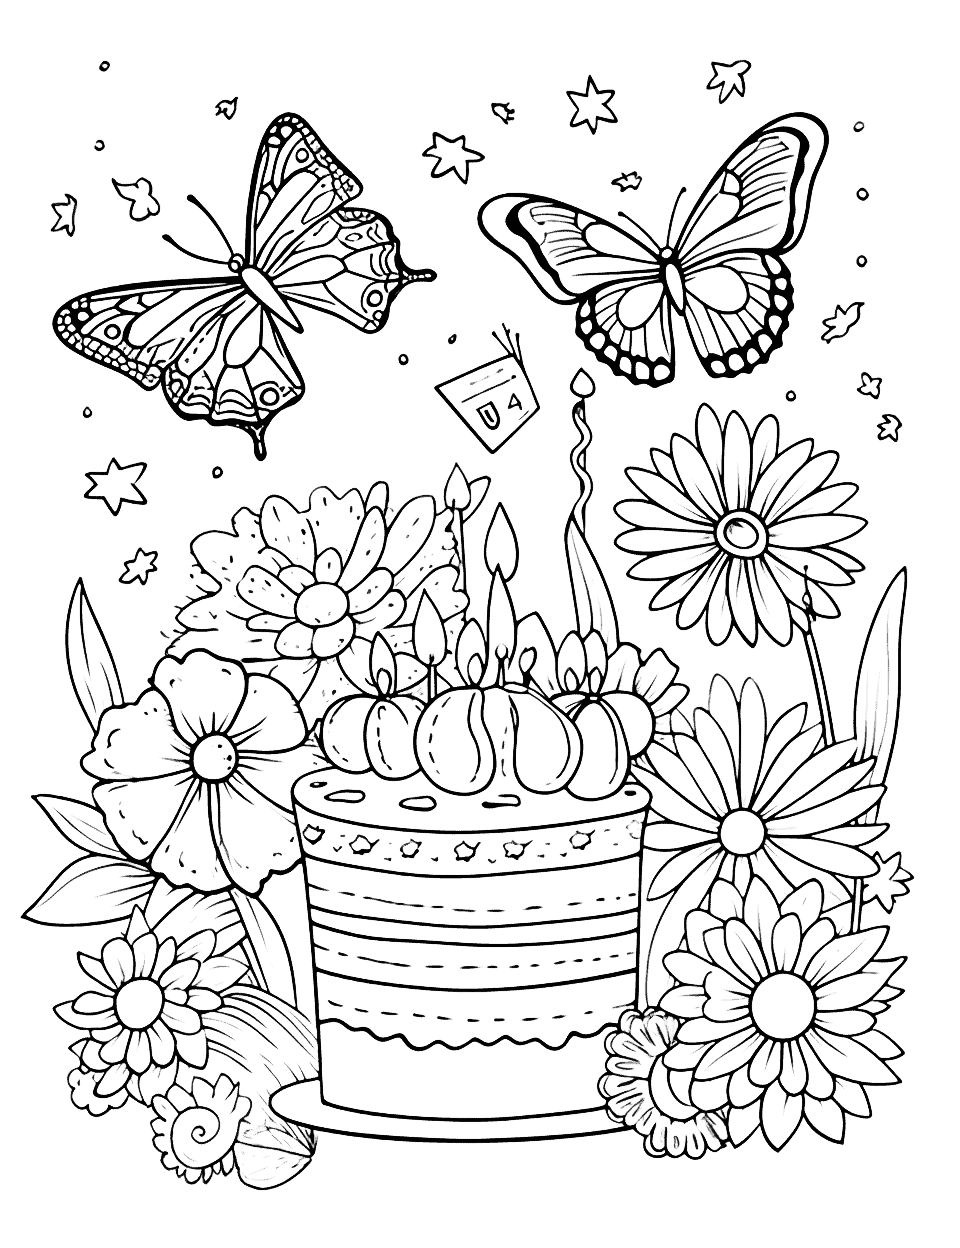 Botanical Garden Birthday Happy Coloring Page - Butterflies and bees celebrating a birthday among colorful flowers in a botanical garden.